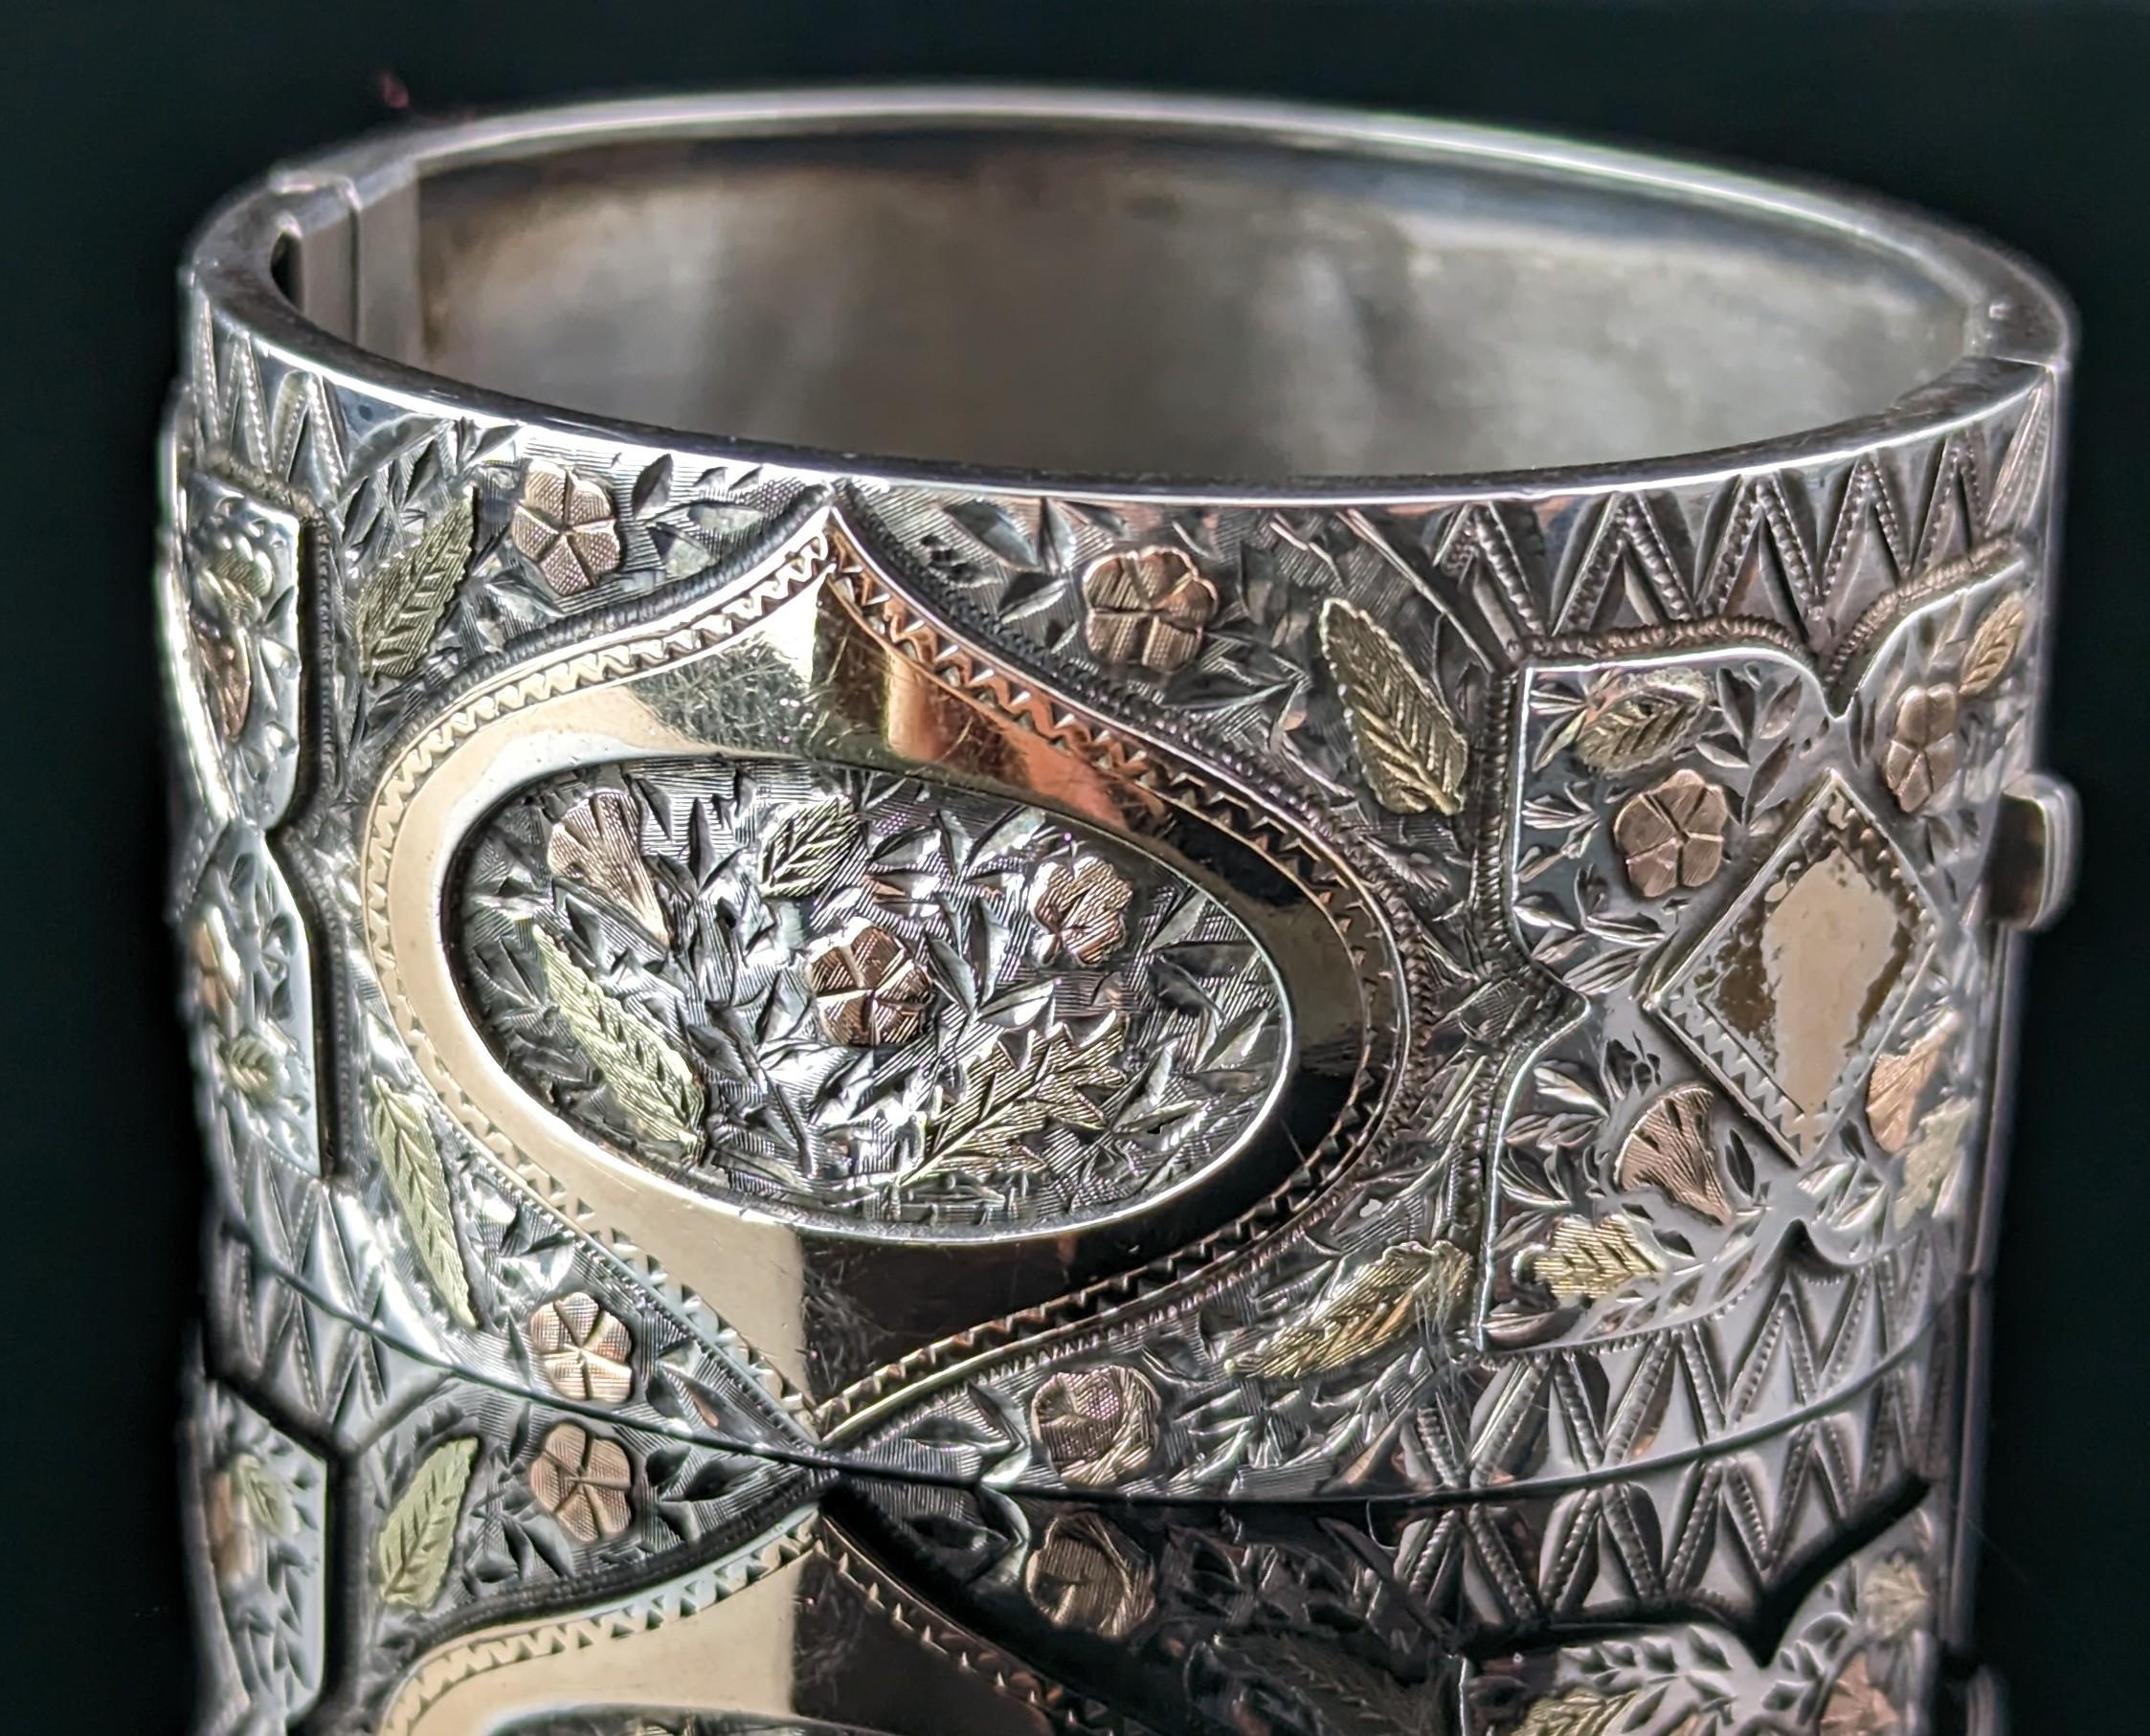 You can't help but fall in love with this gorgeous antique, Victorian, sterling silver and gold bangle.

The bangle is wide and chunky with a smooth polished reverse and a profusely engraved front with areas picked out in relief and beautiful